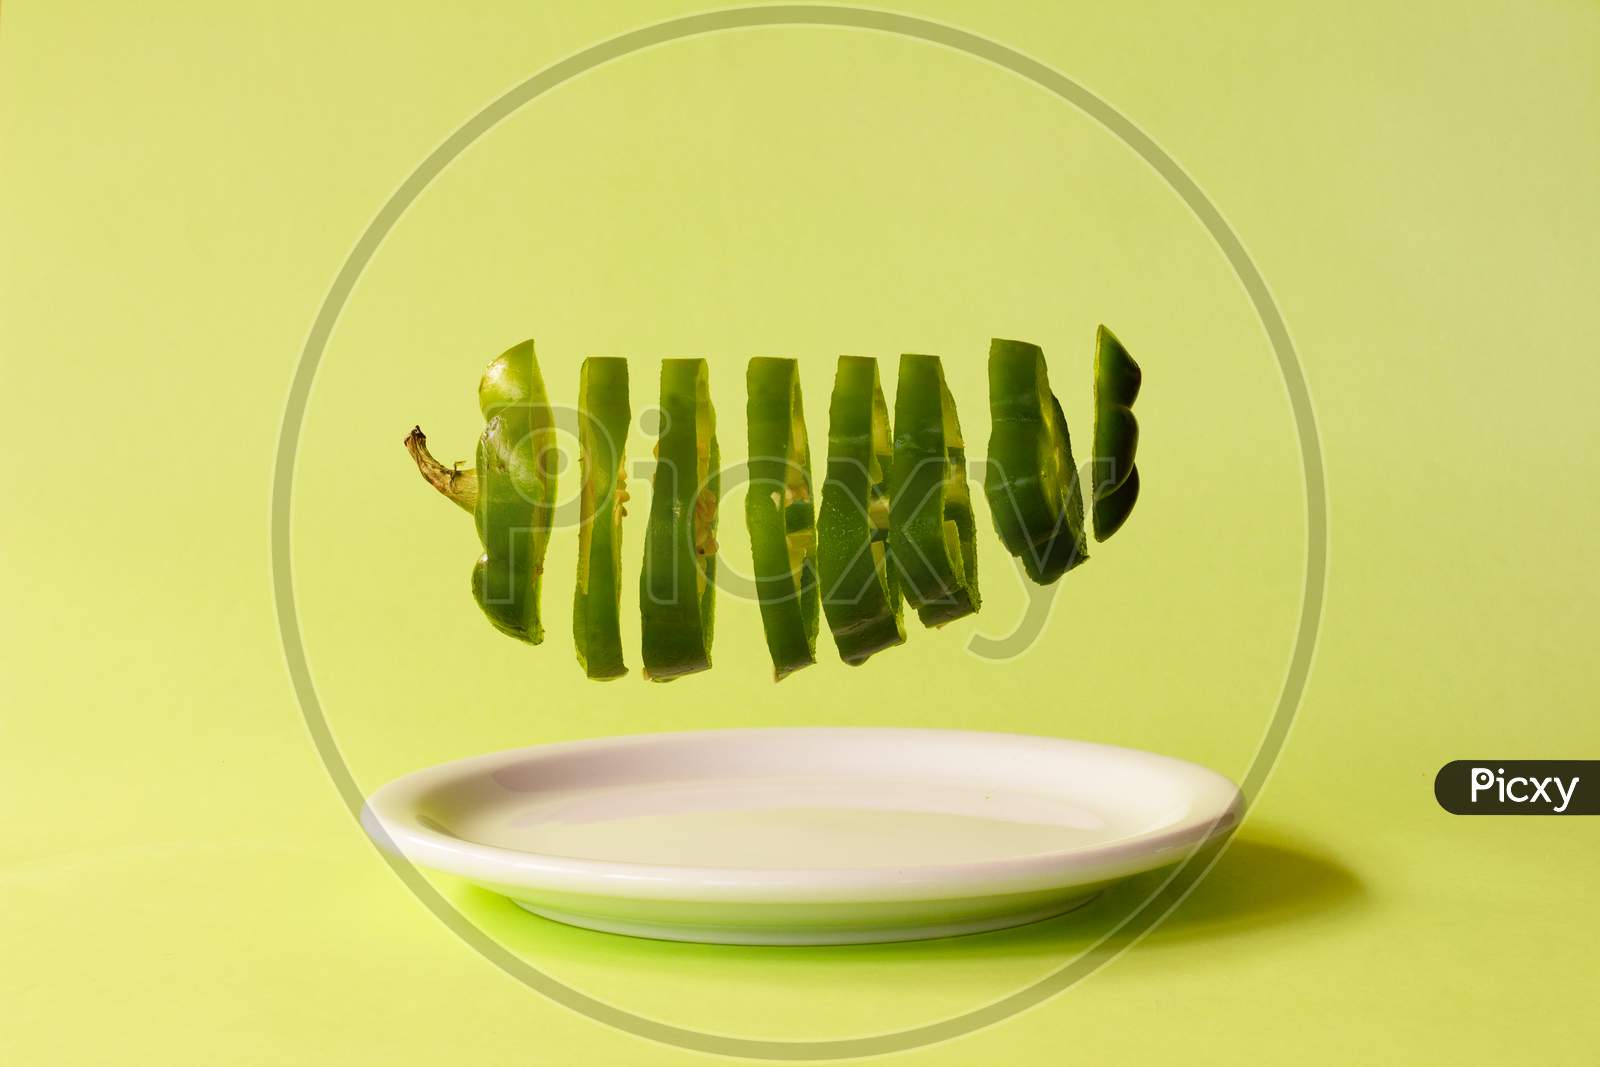 Green Bell Pepper Cut Into Slices Suspended A Plate. Healthy Food Concept.